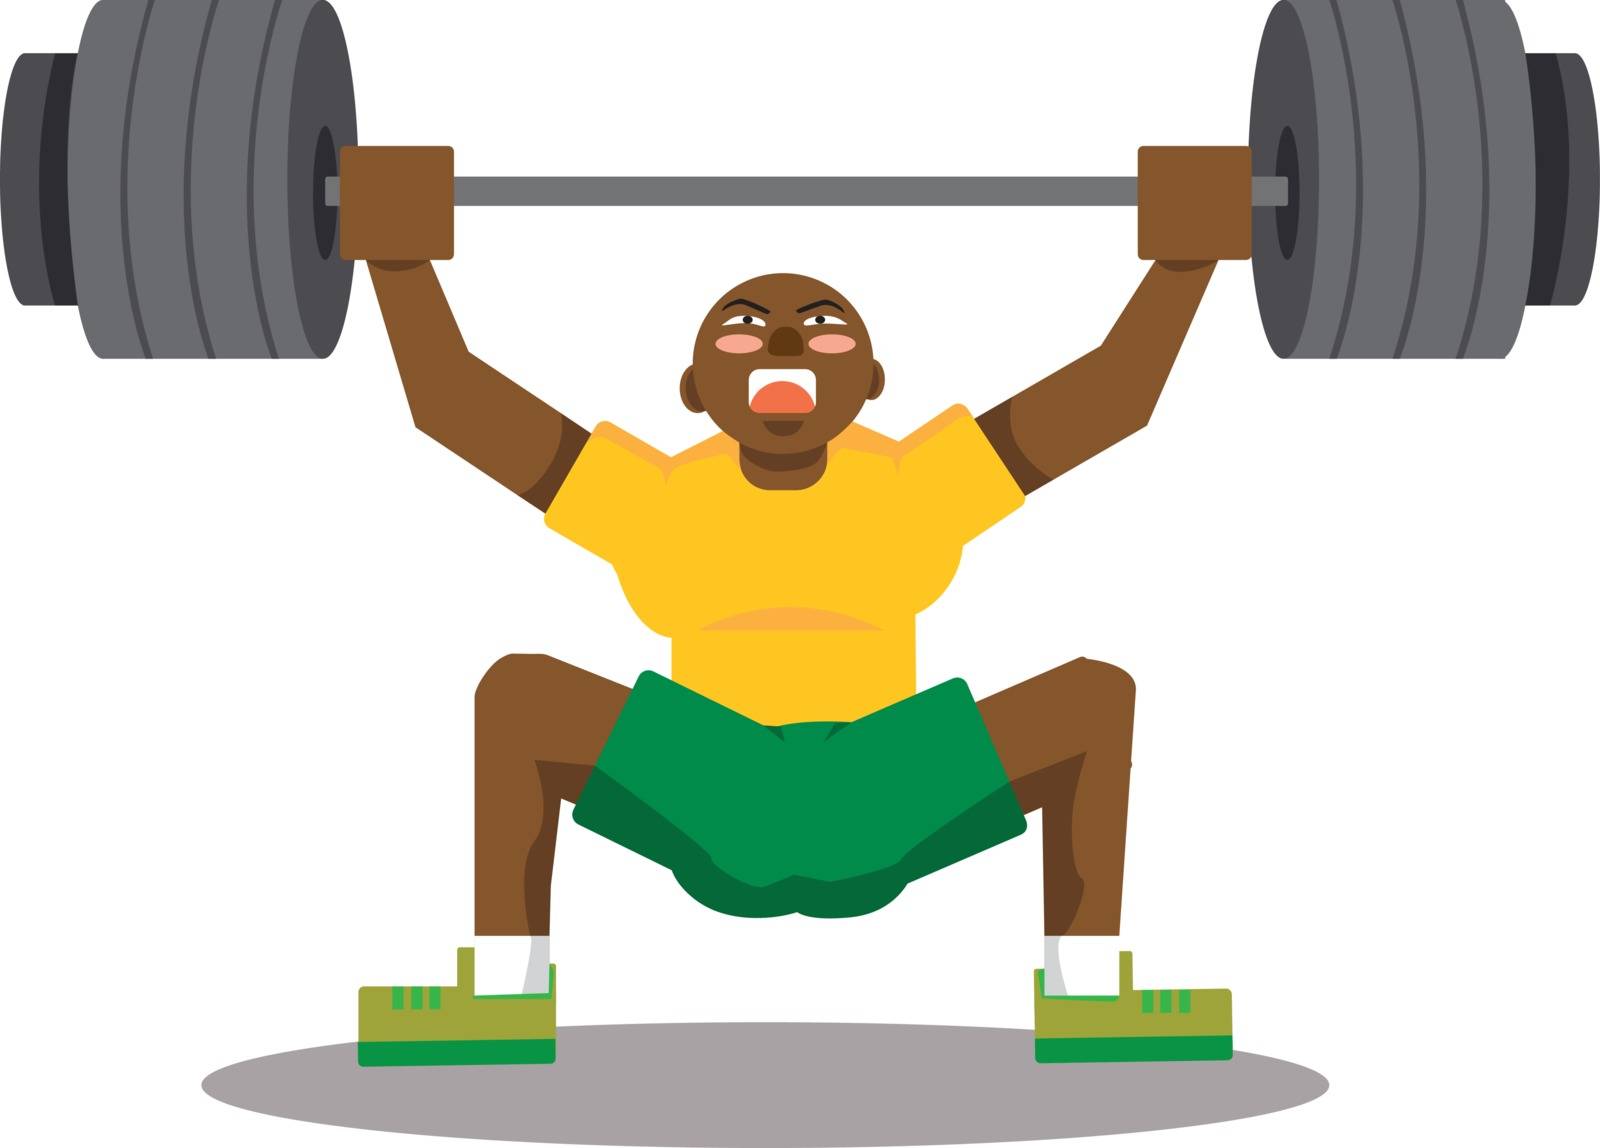 Man lifting weights, illustration, vector on white background.